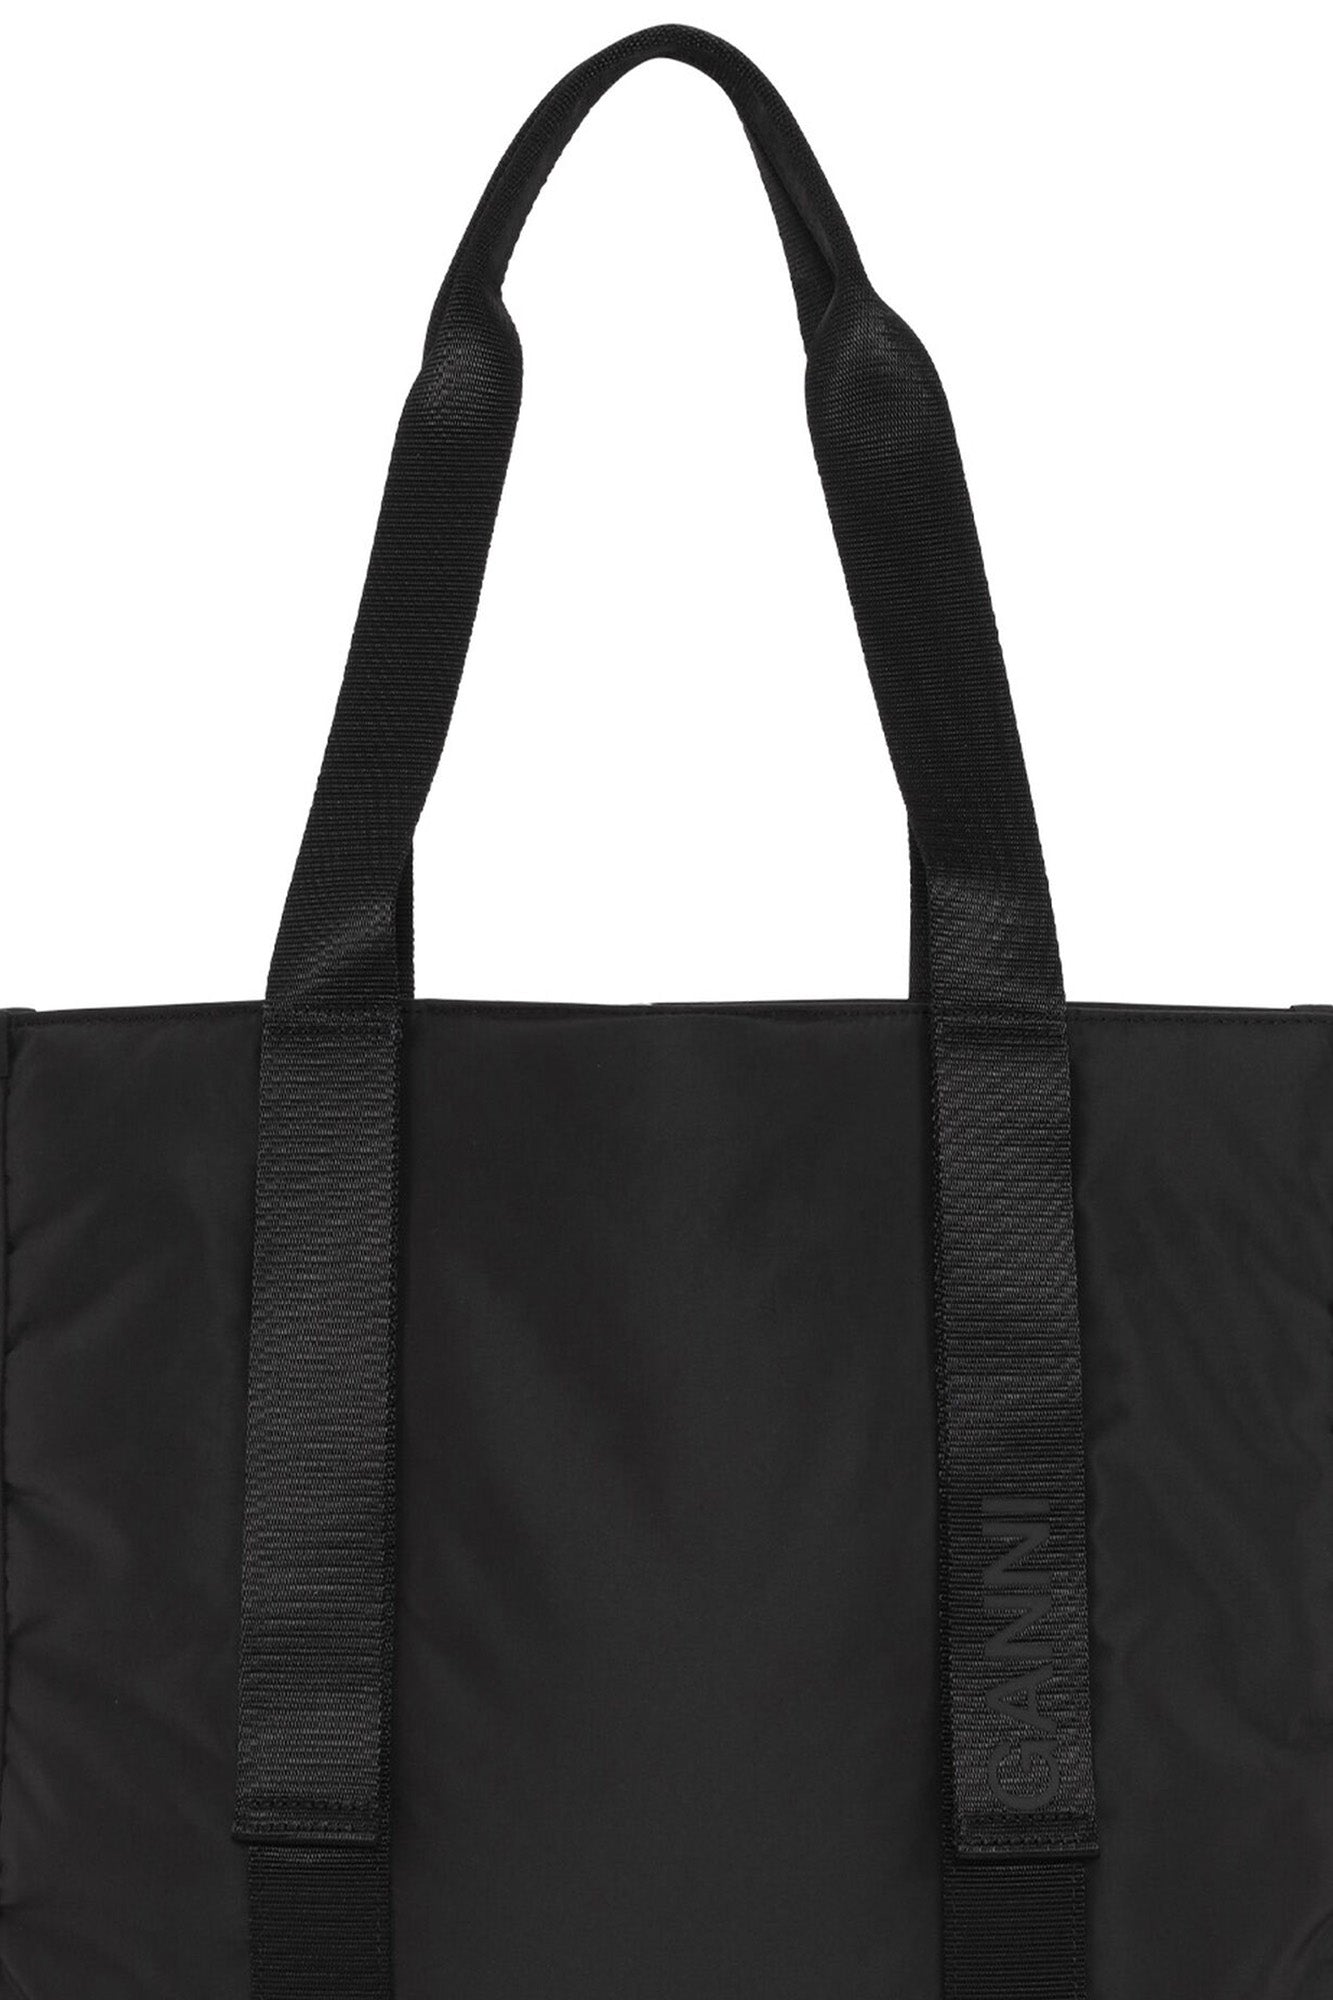 RECYCLED TECH MEDIUM TOTE